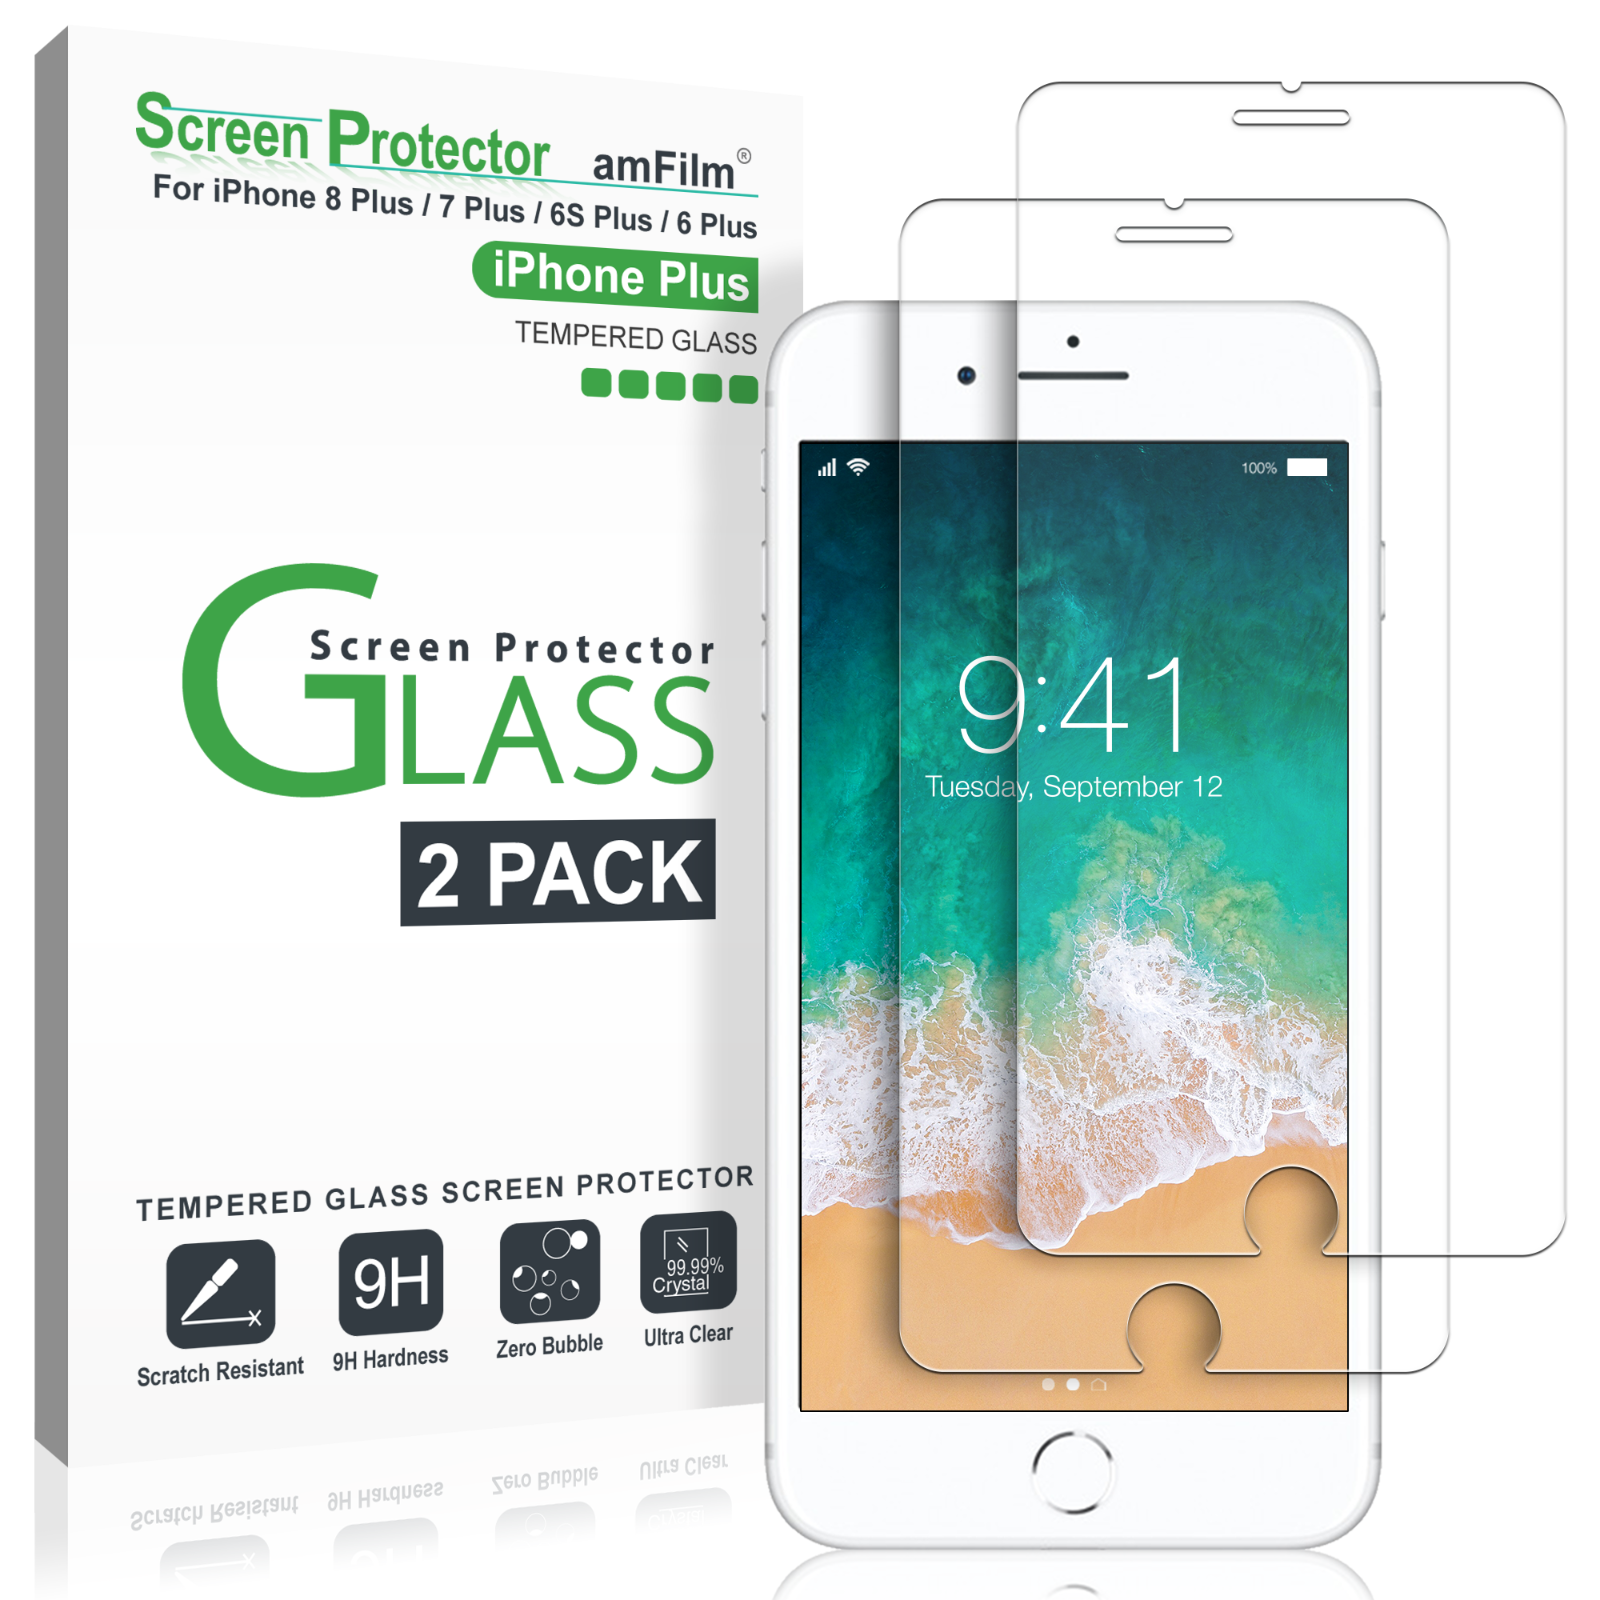 For Iphone 8 Plus / 7 Plus / 6s Plus - Tempered Glass Screen Protector (2 Pack)